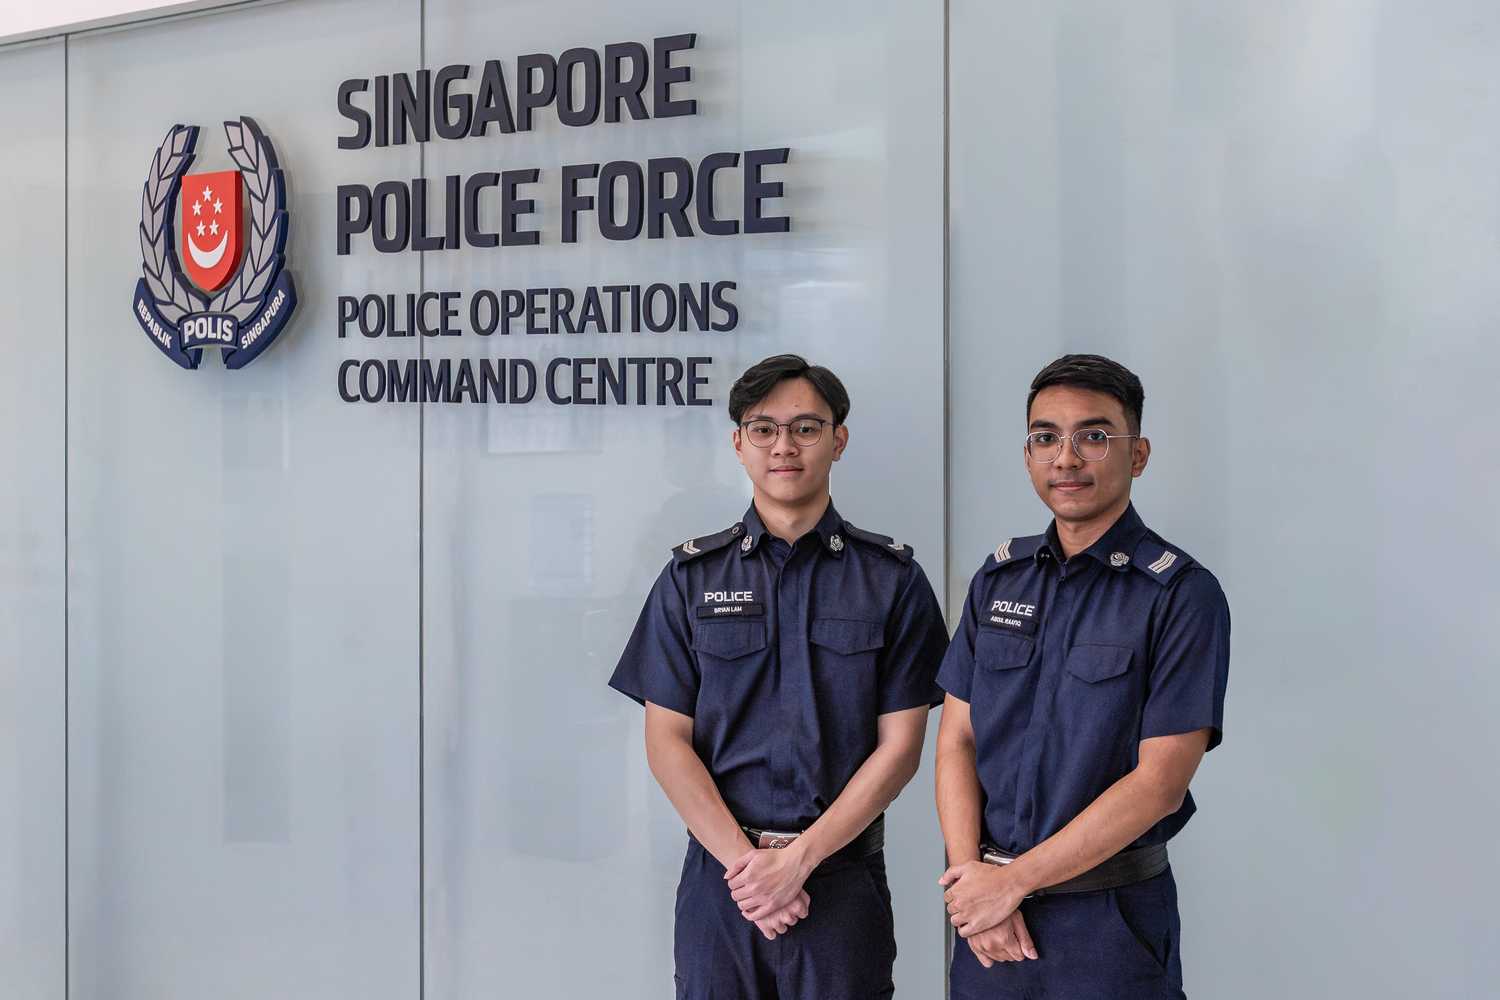 two pnsfs standing infront of a wall that reads Police Operations Command Centre, and posing with their hands locked infront of them, 